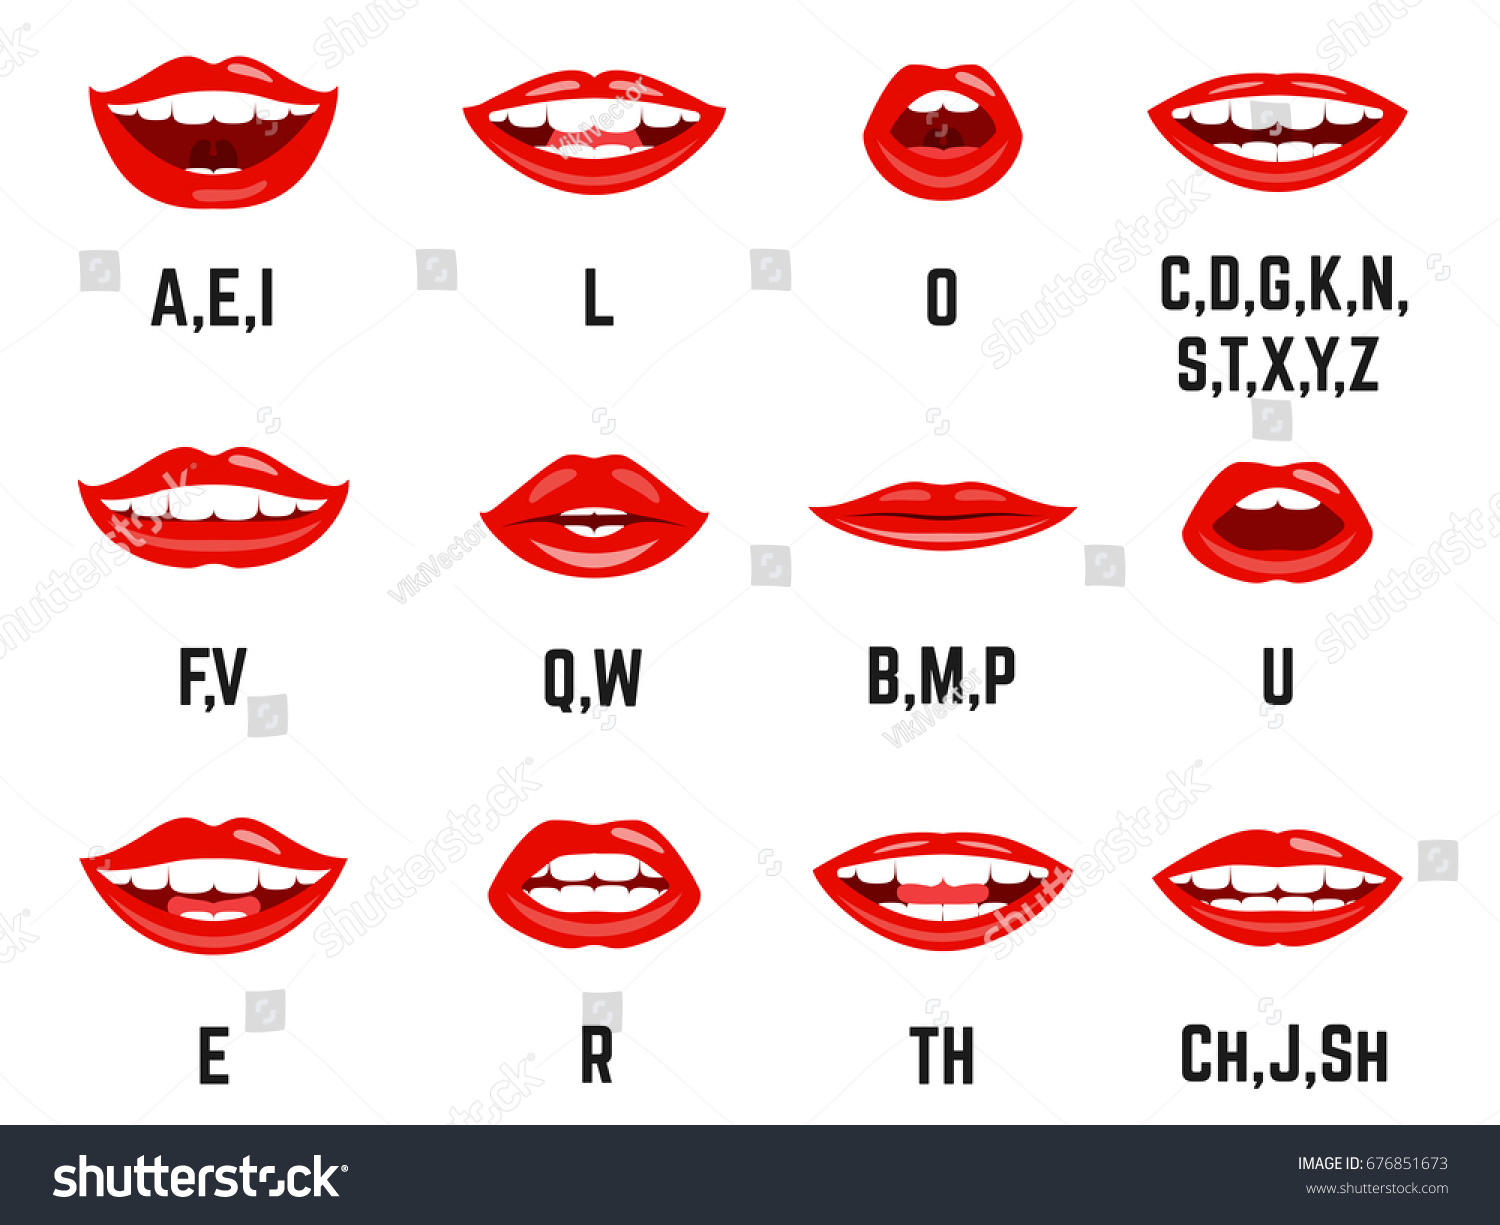 Lips Sound Pronunciation Mouth Shape Stock Vector (Royalty Free) 676851673